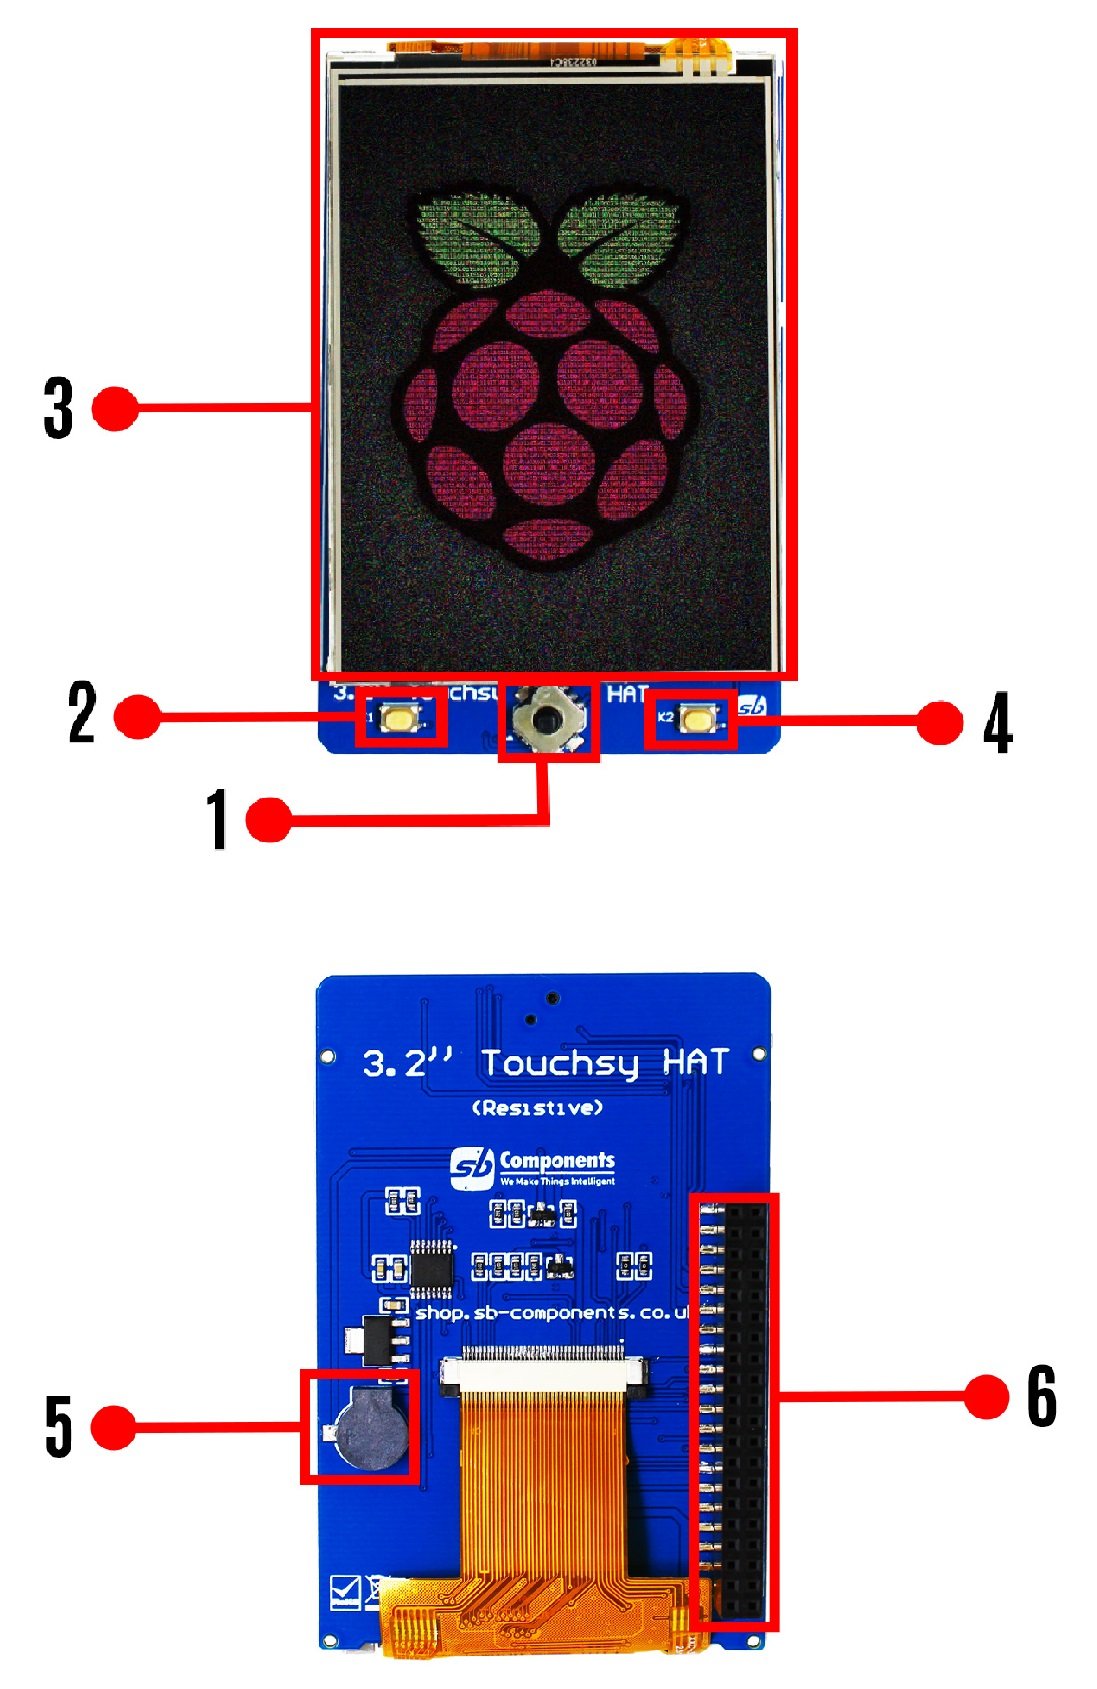 Touchsy HAT - overlay with a 3.2'' LCD touch display 320 x 240 px for Raspberry Pi - SB Components 26418 - arrangement of elements on the board